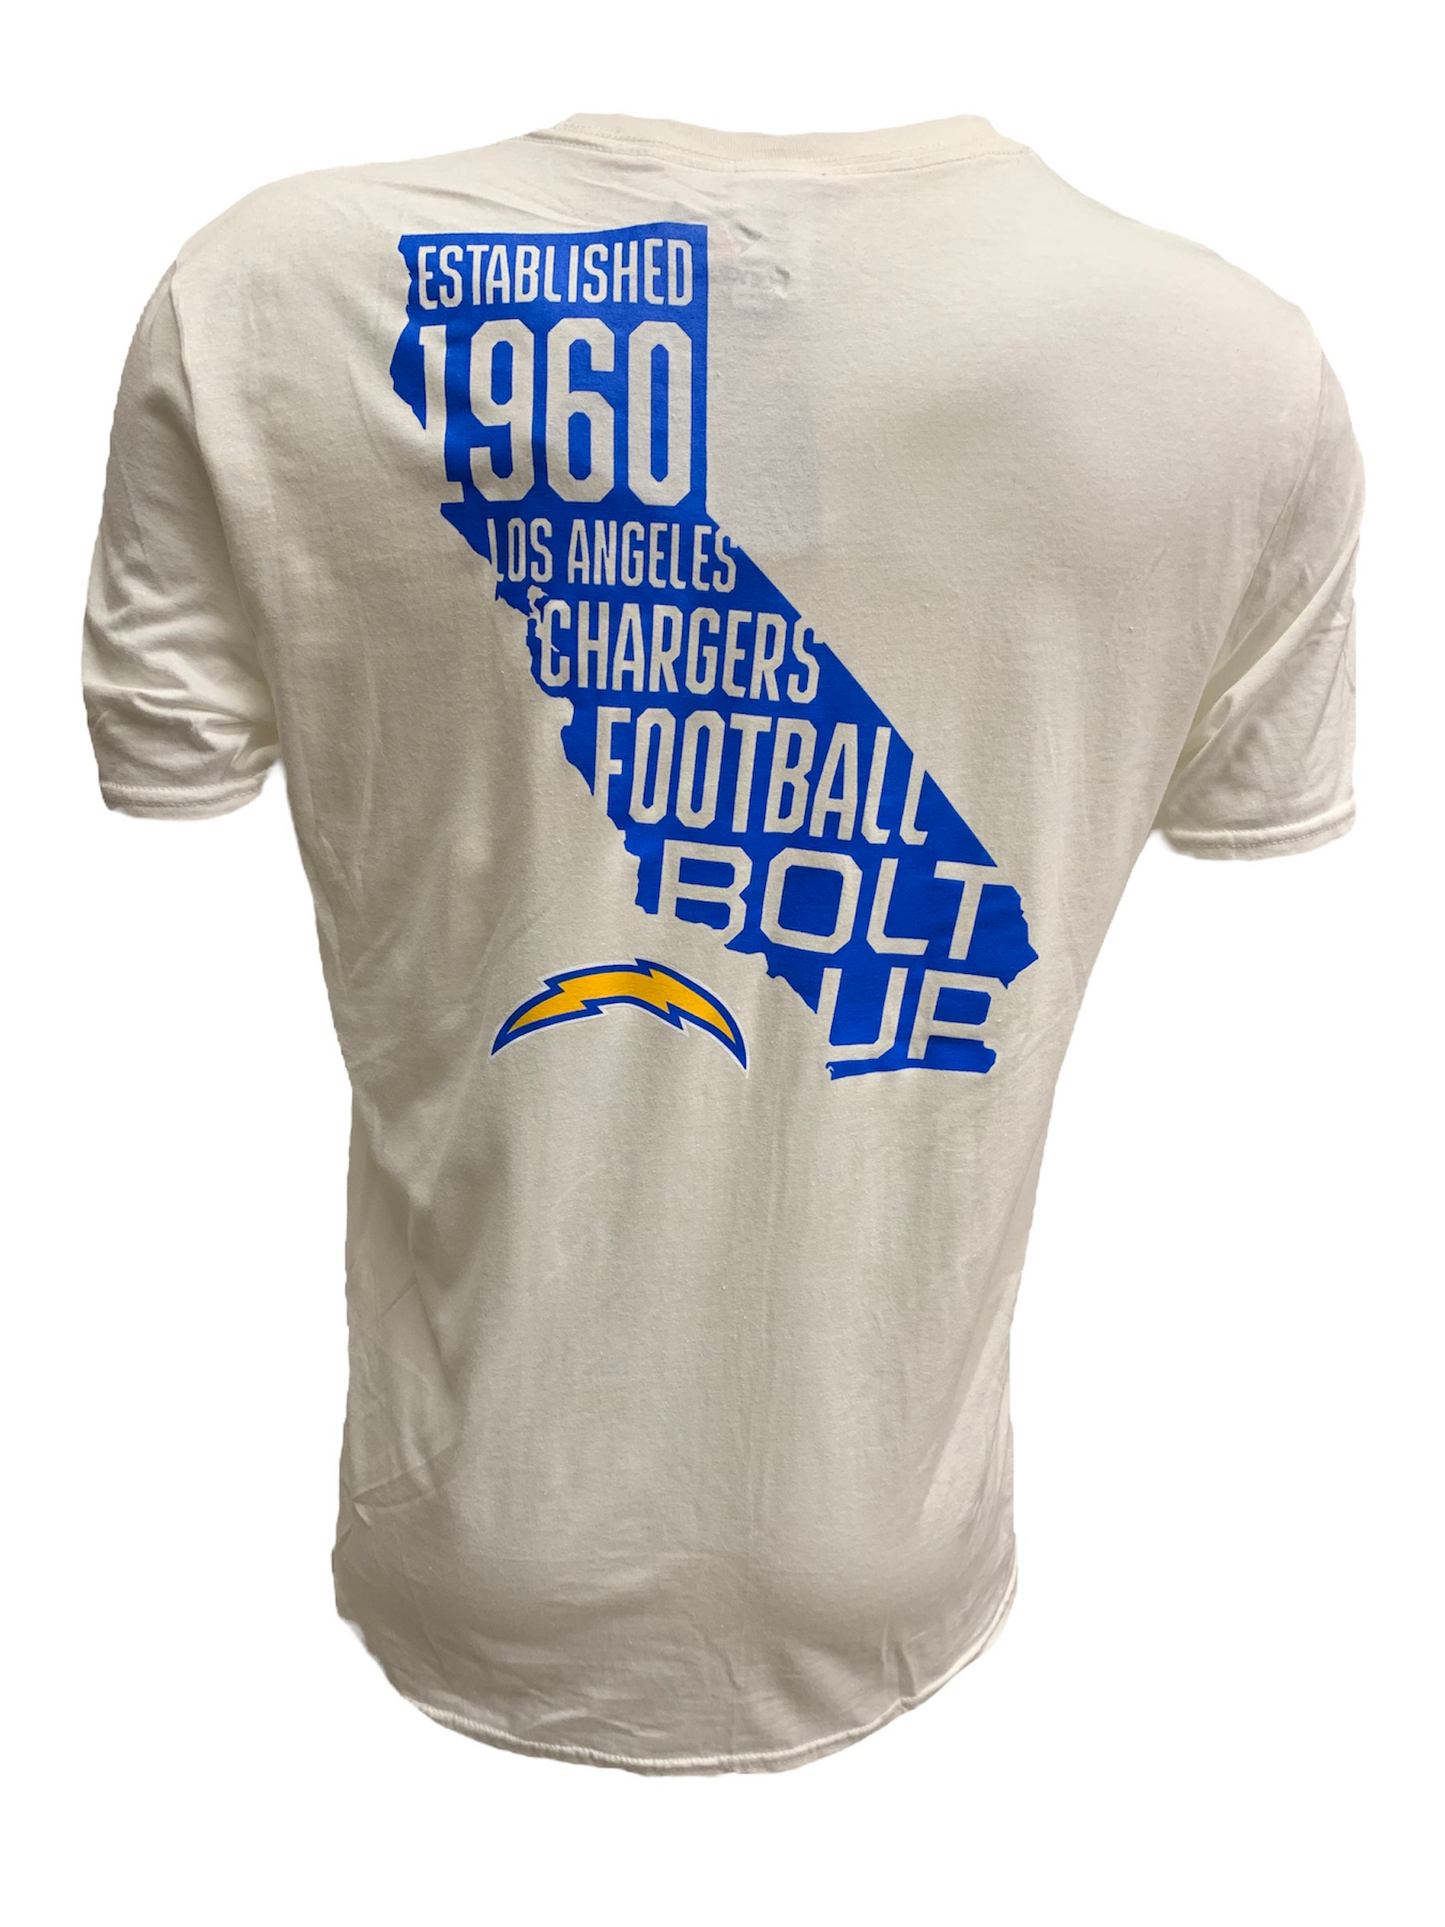 chargers vintage t shirt